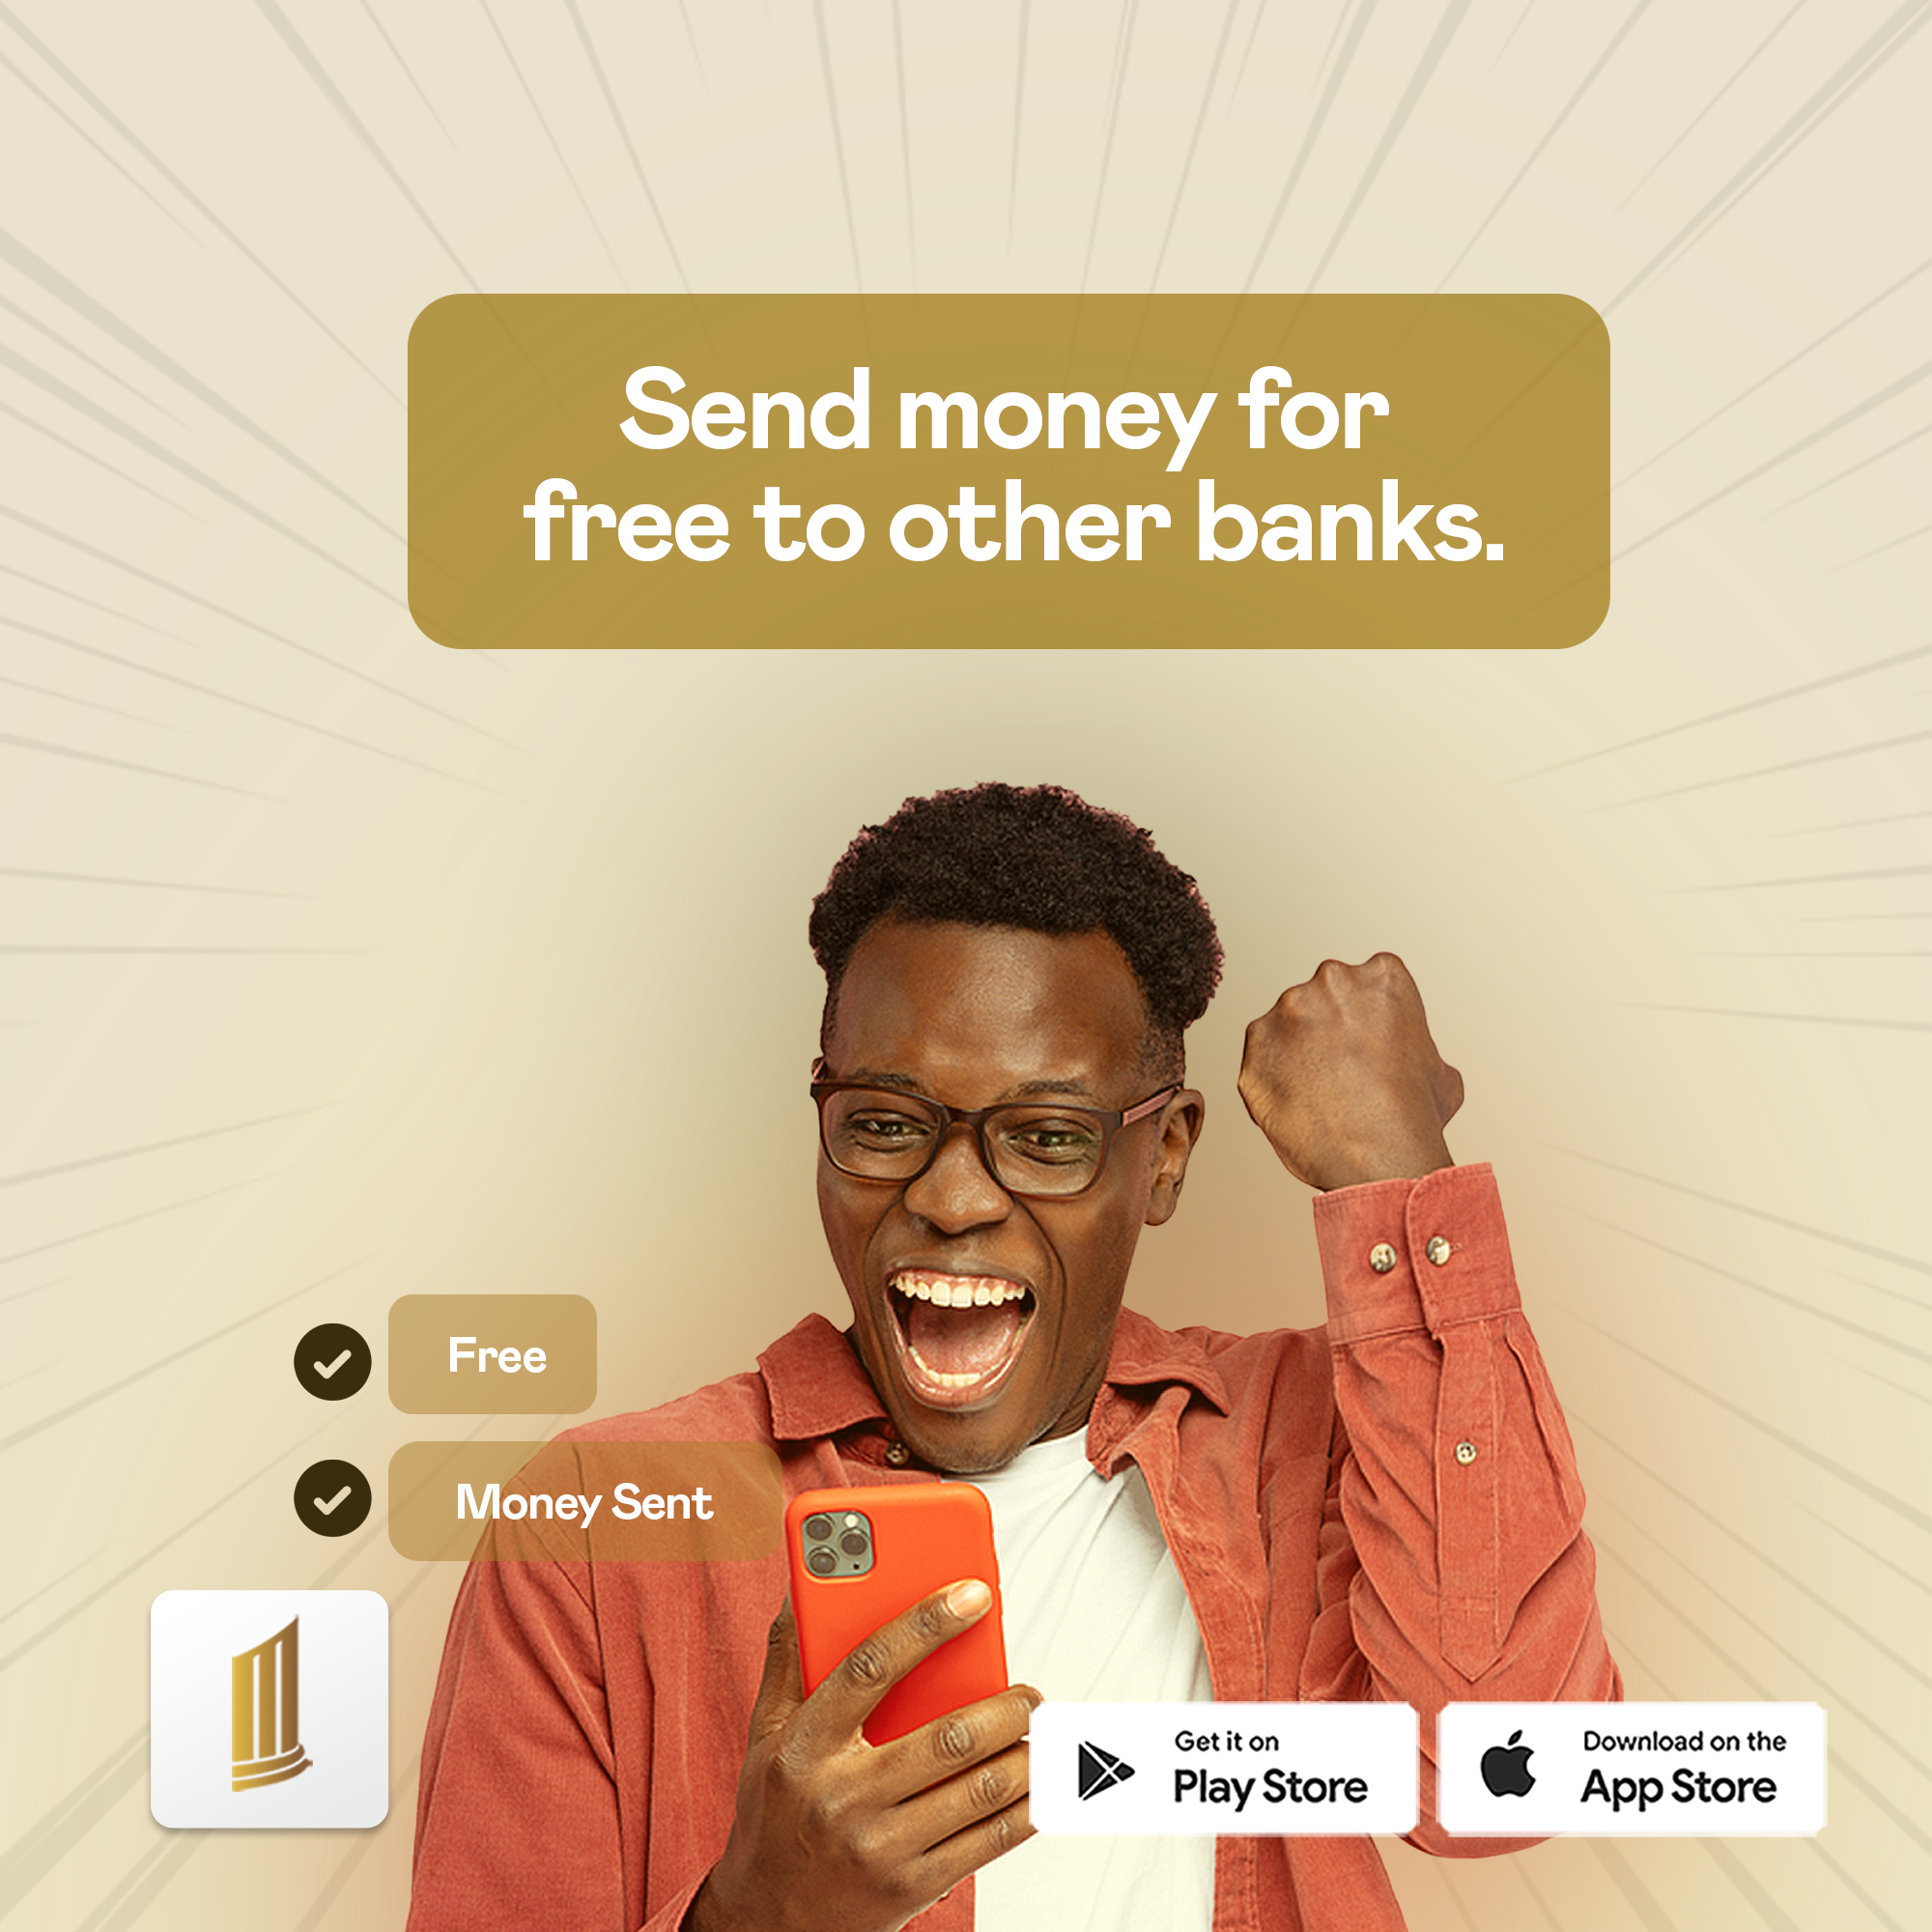 Send money for free to other banks